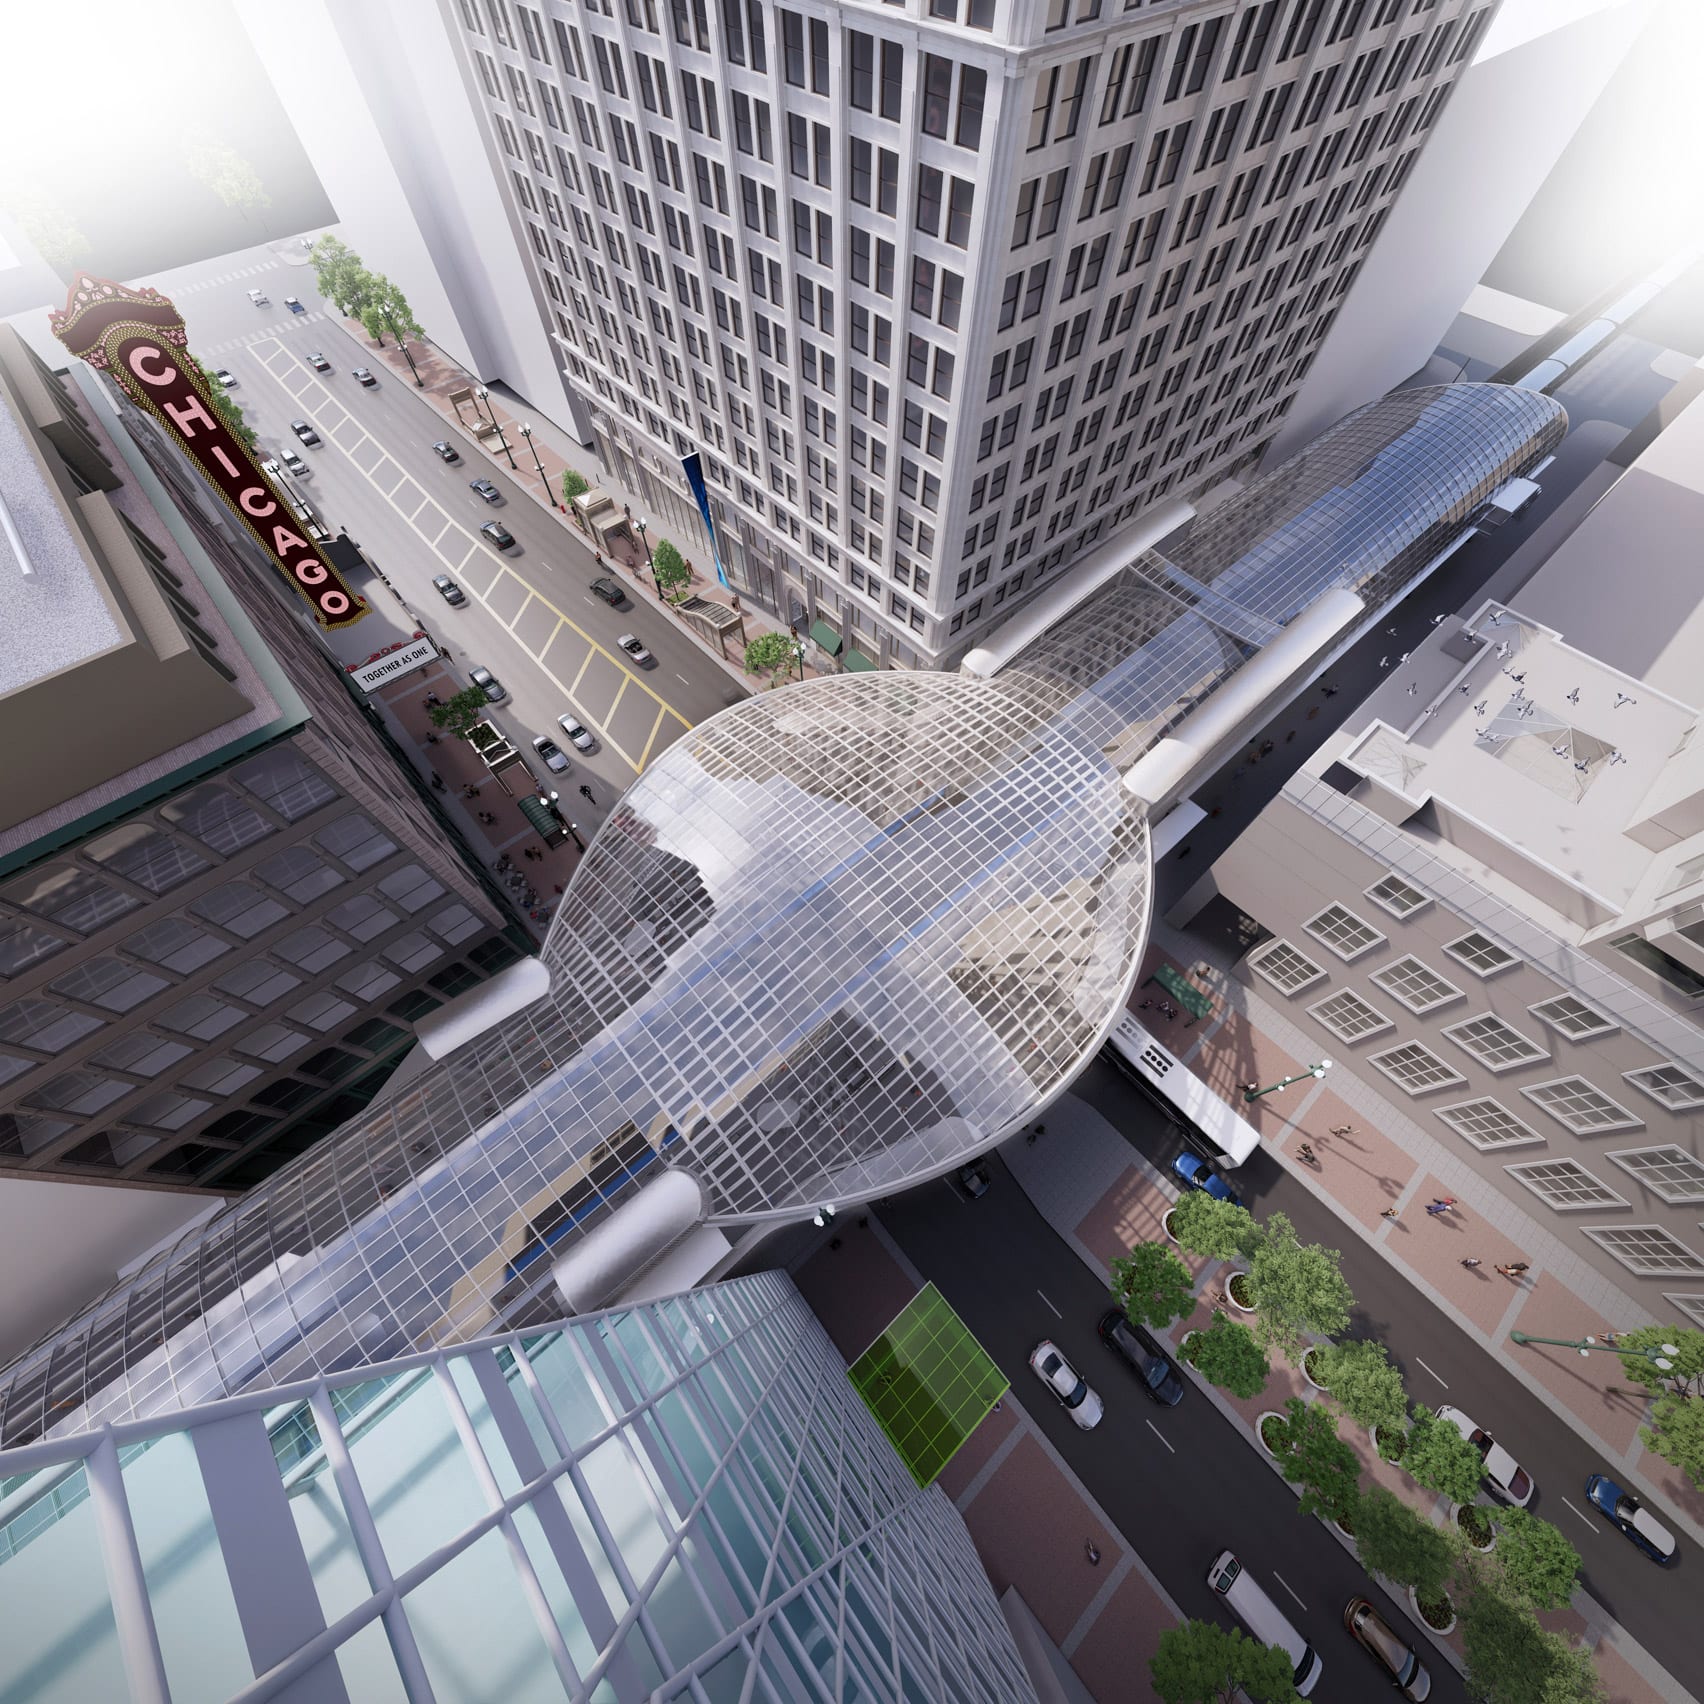 Glass canopy over metro station redesign in Chicago